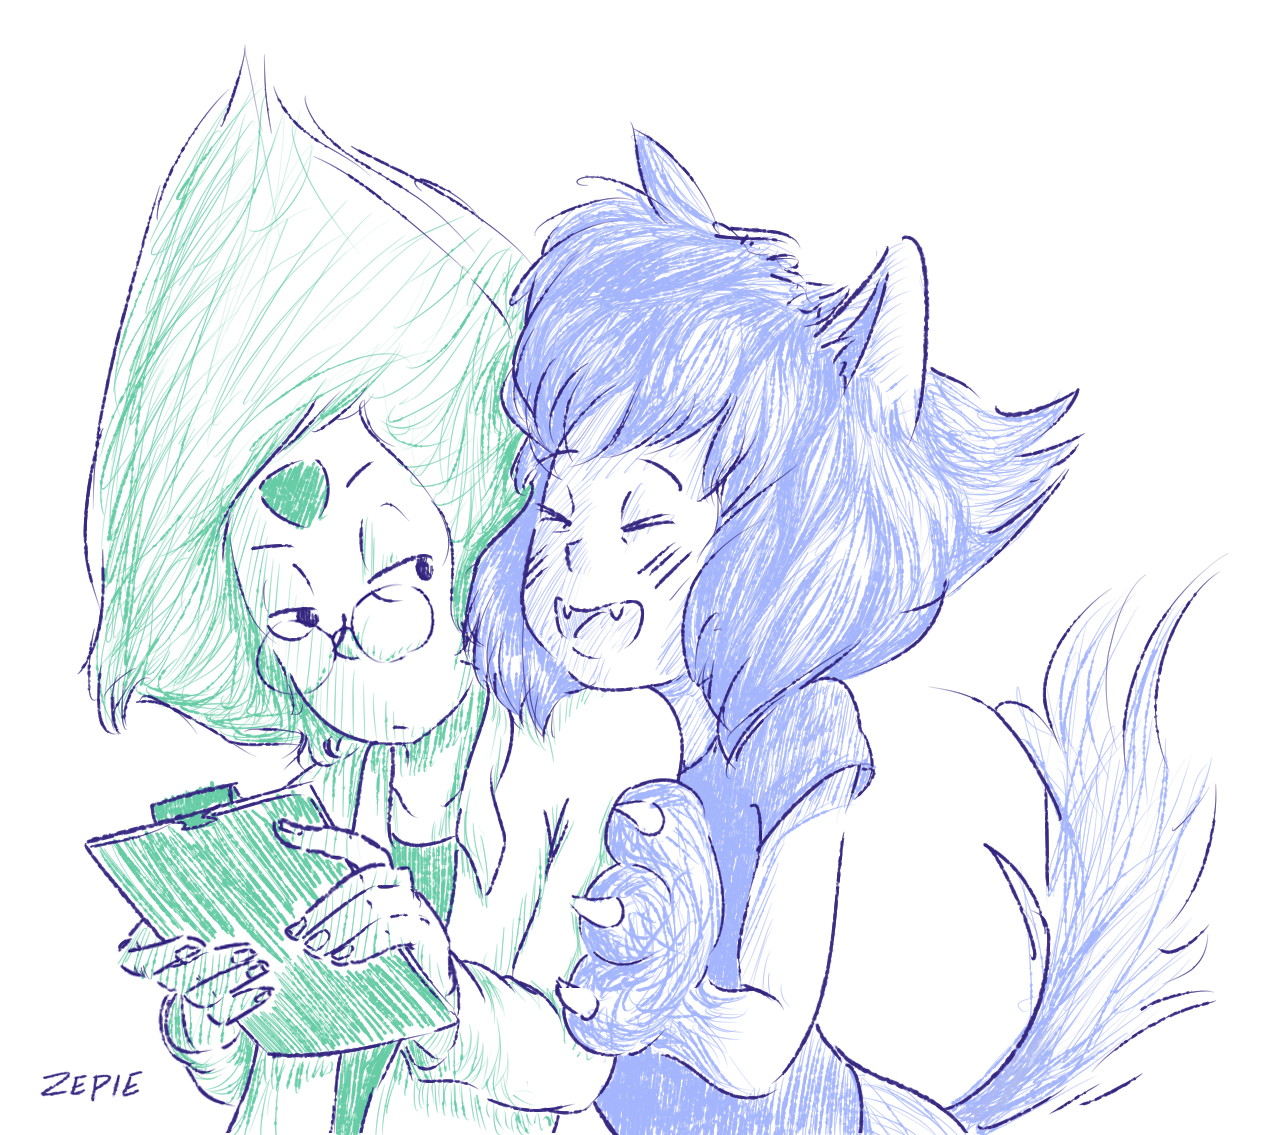 @lynne-littell your lapidot werewolf au is so freaking adorable i had to draw it!